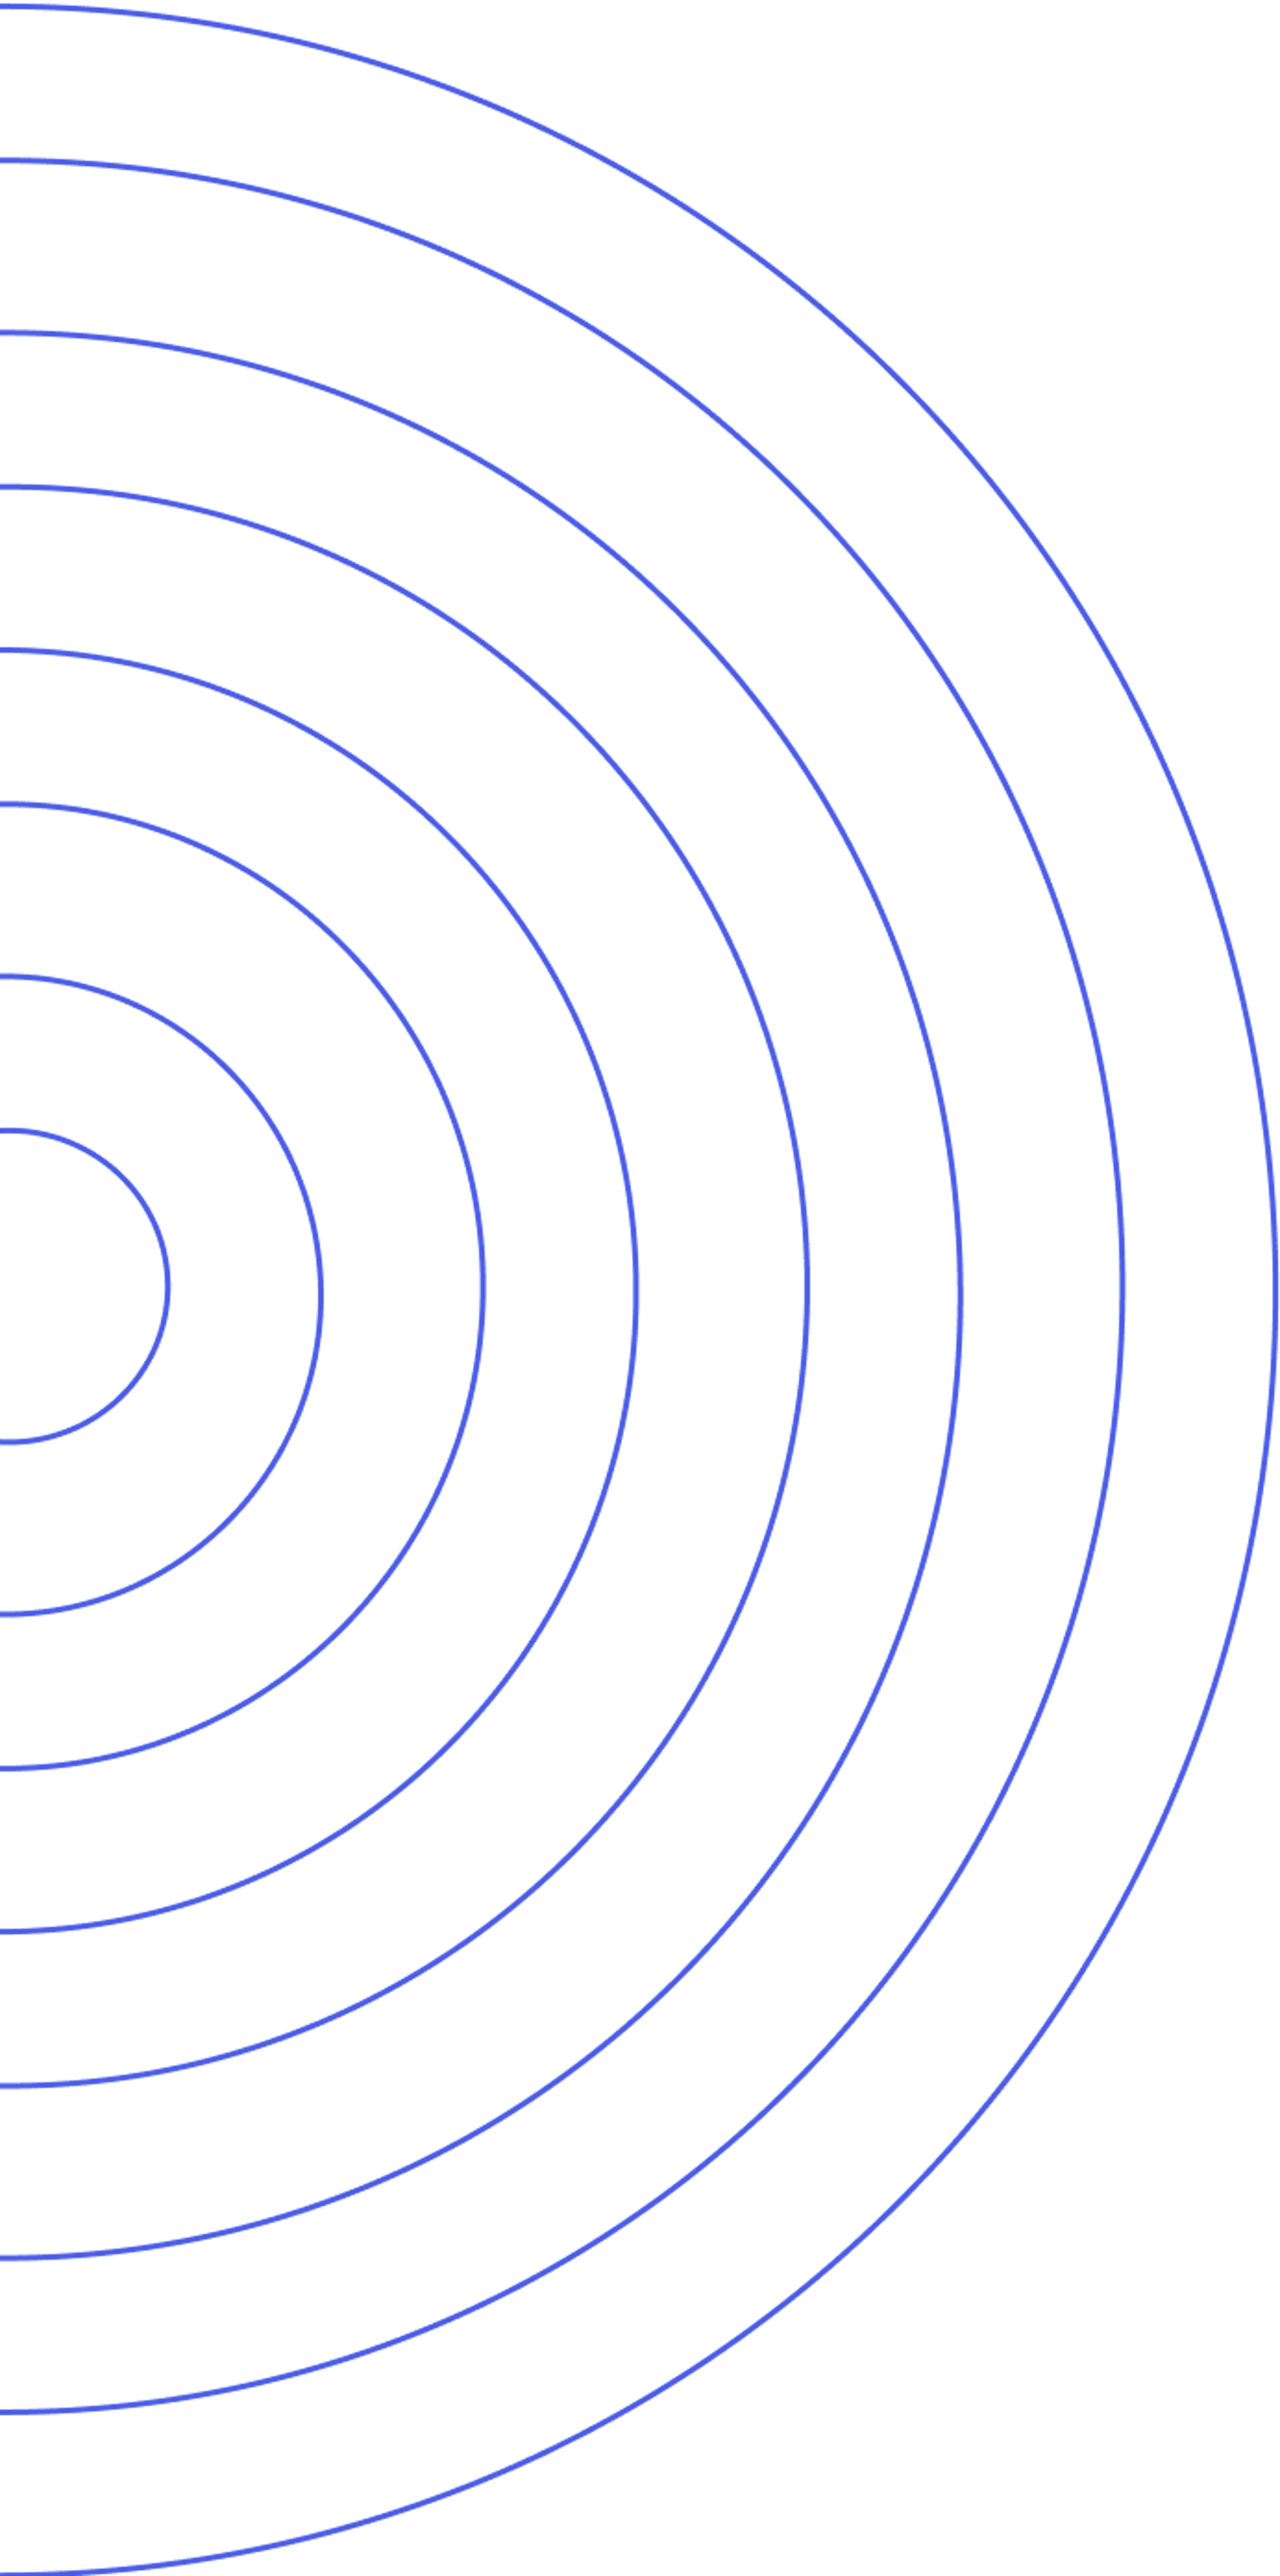 A graphic representation of the right half of 8 concentric circles